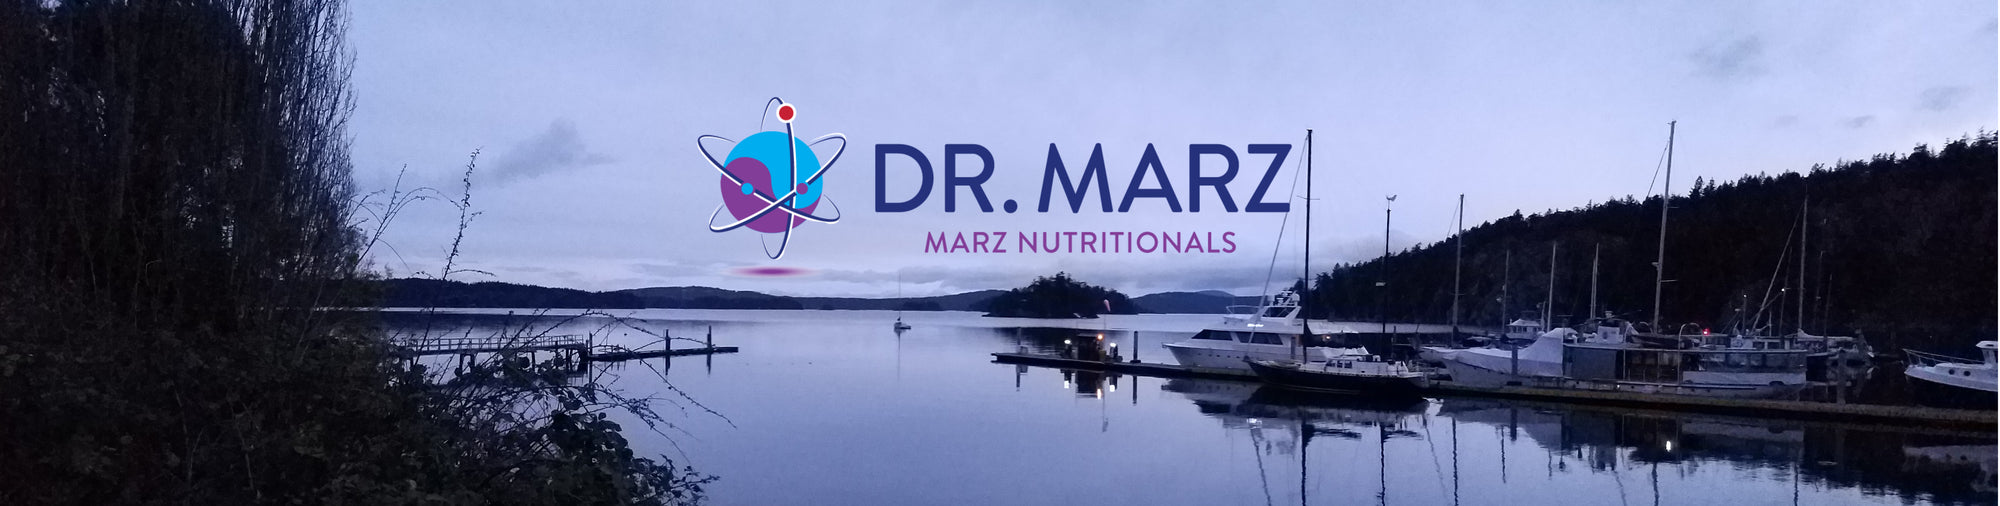 <span style="color: #f89021;">Marz Nutritionals</span>